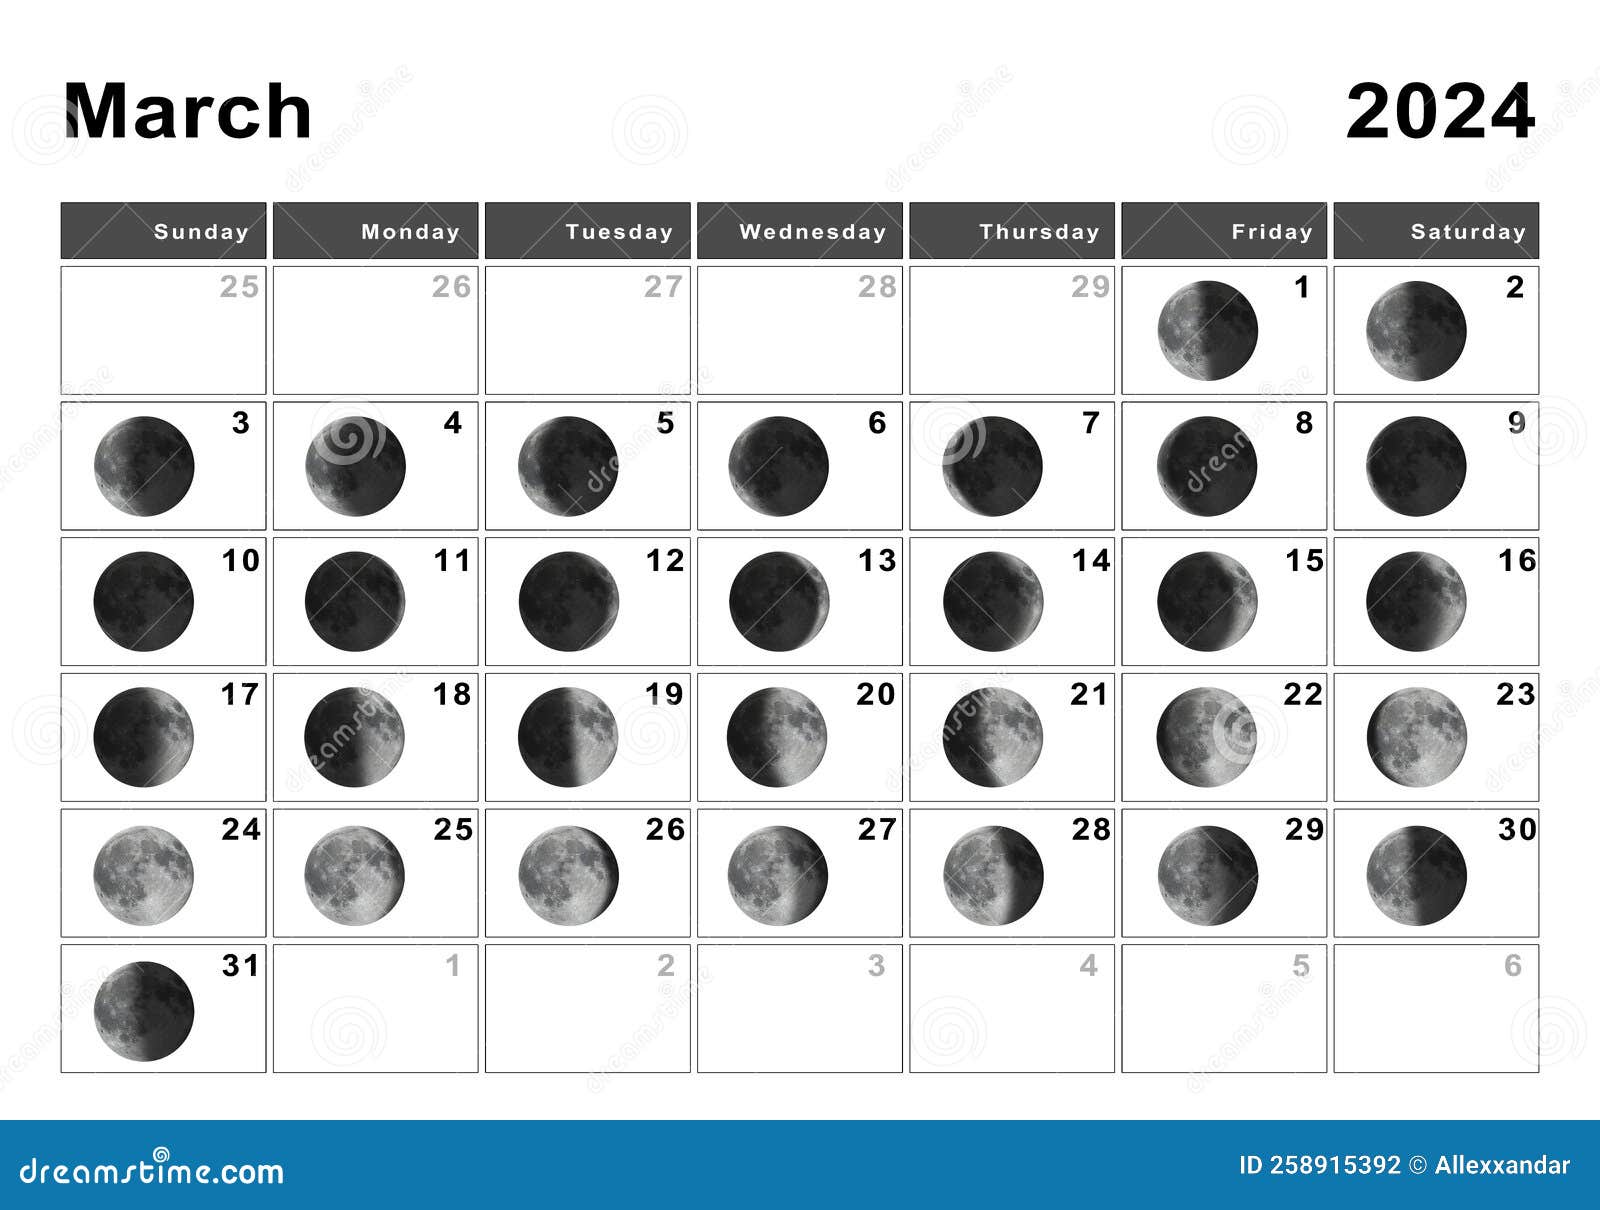 Moon Phase March 2024 cathee analiese